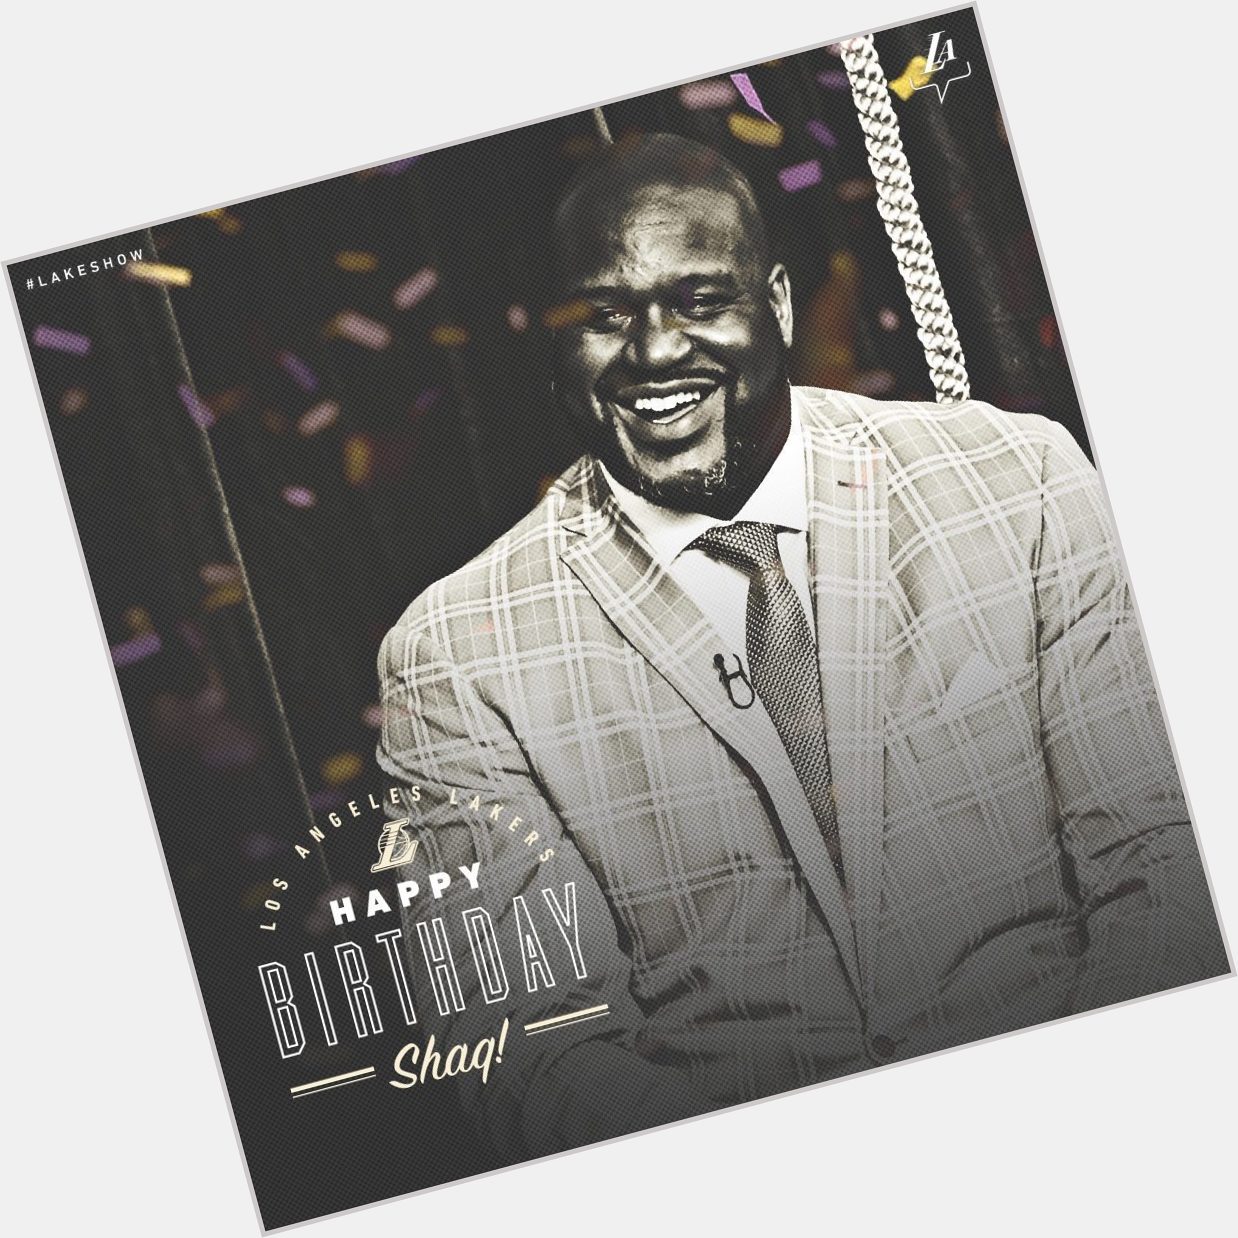 Wishing a happy birthday to the one and only, Shaquille O Neal!  